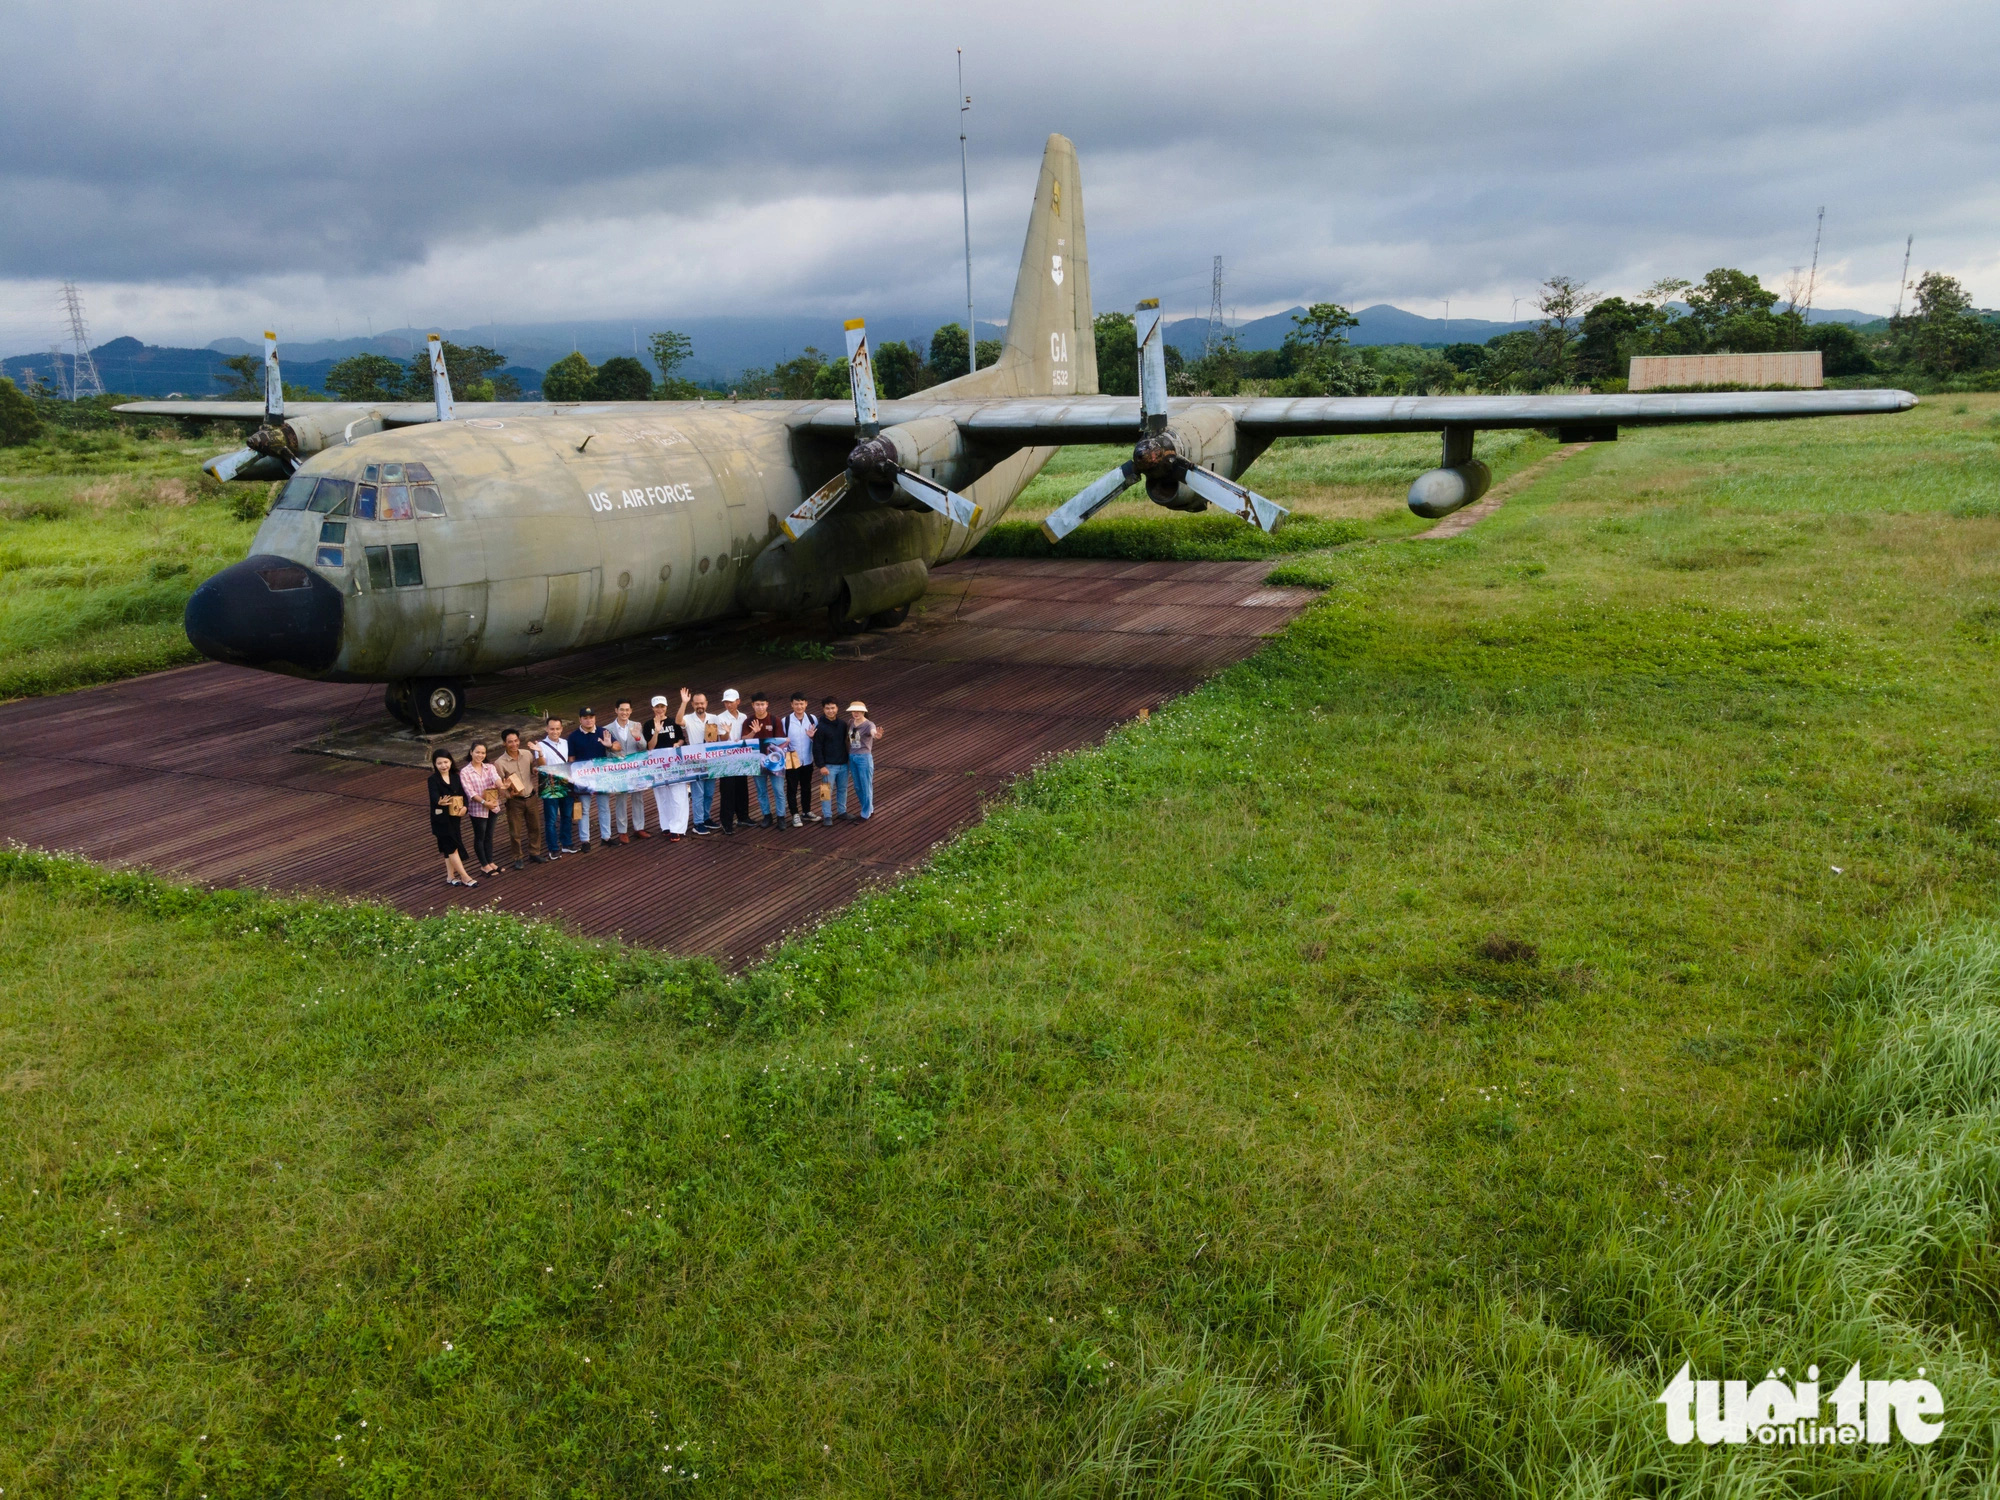 Vietnam’s Quang Tri to receive historic C-119 aircraft for display